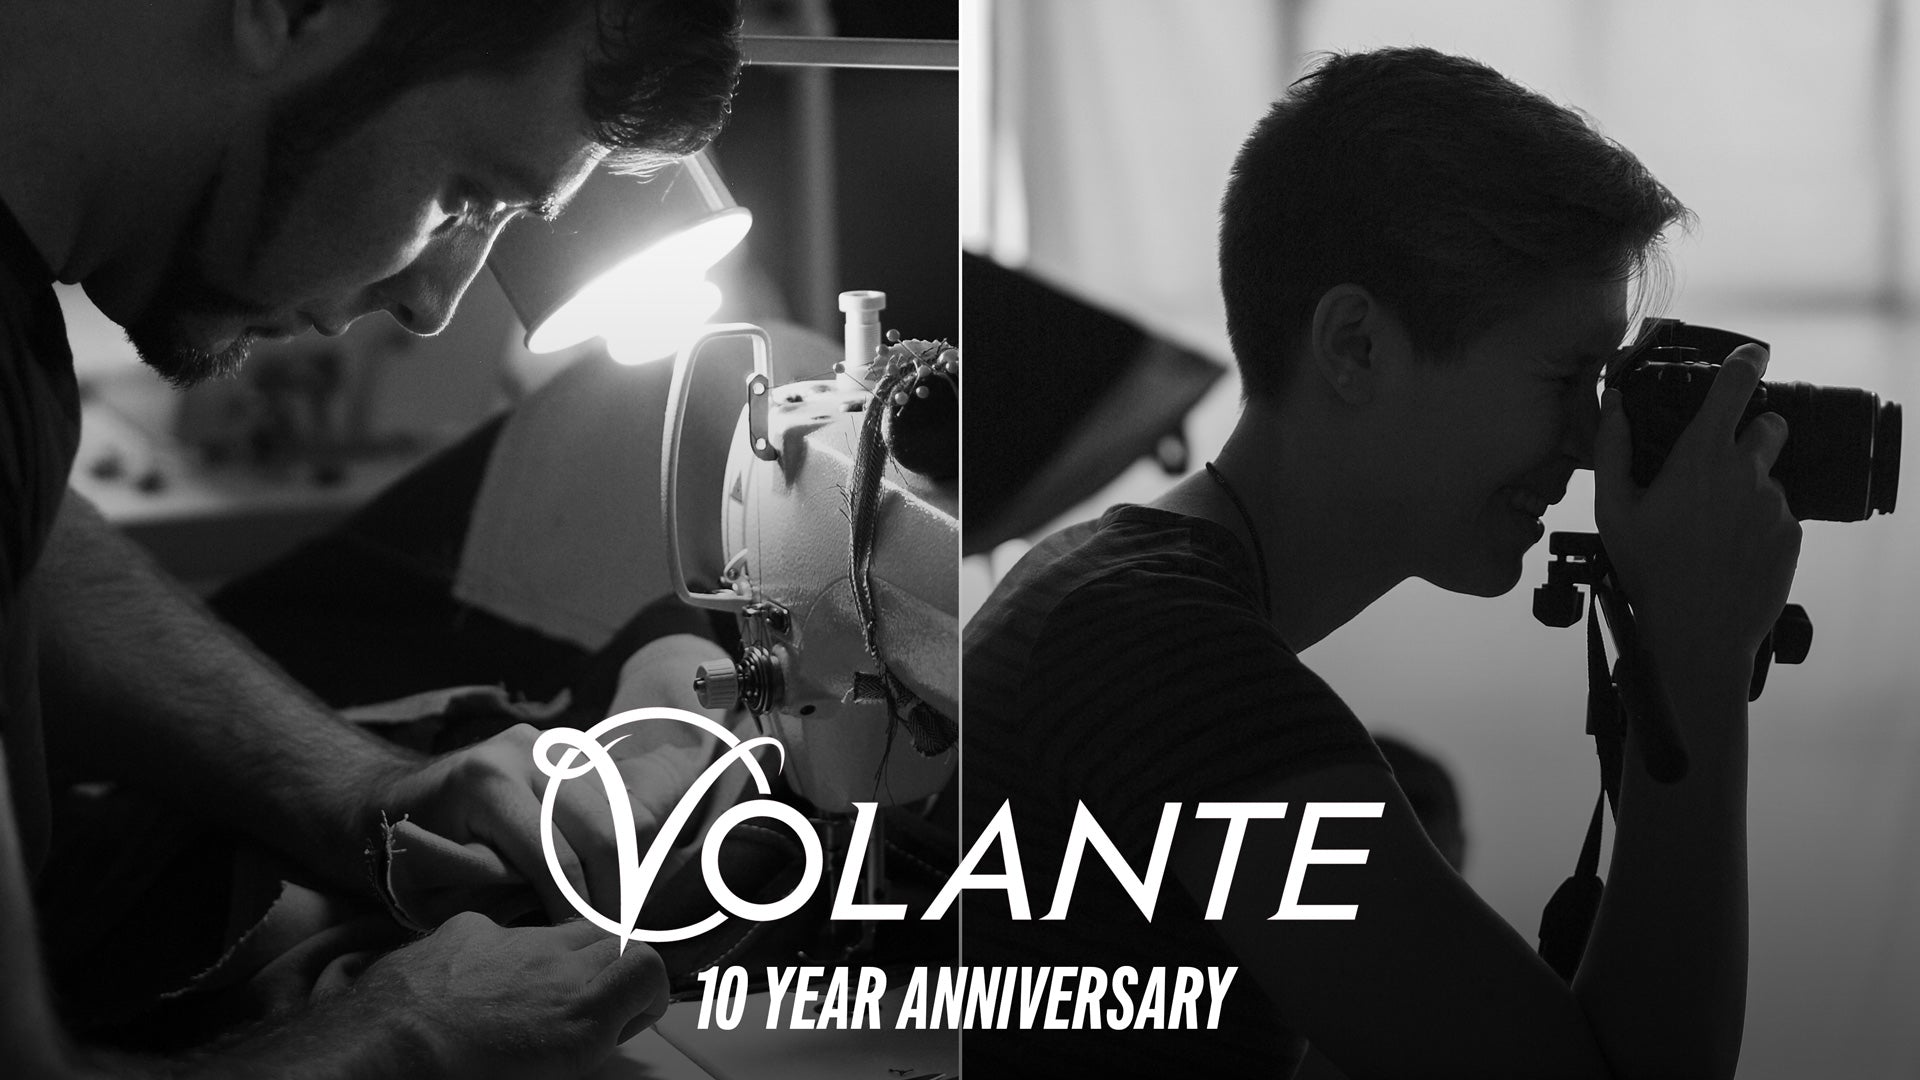 Looking Ahead to Volante's Next 10 Years